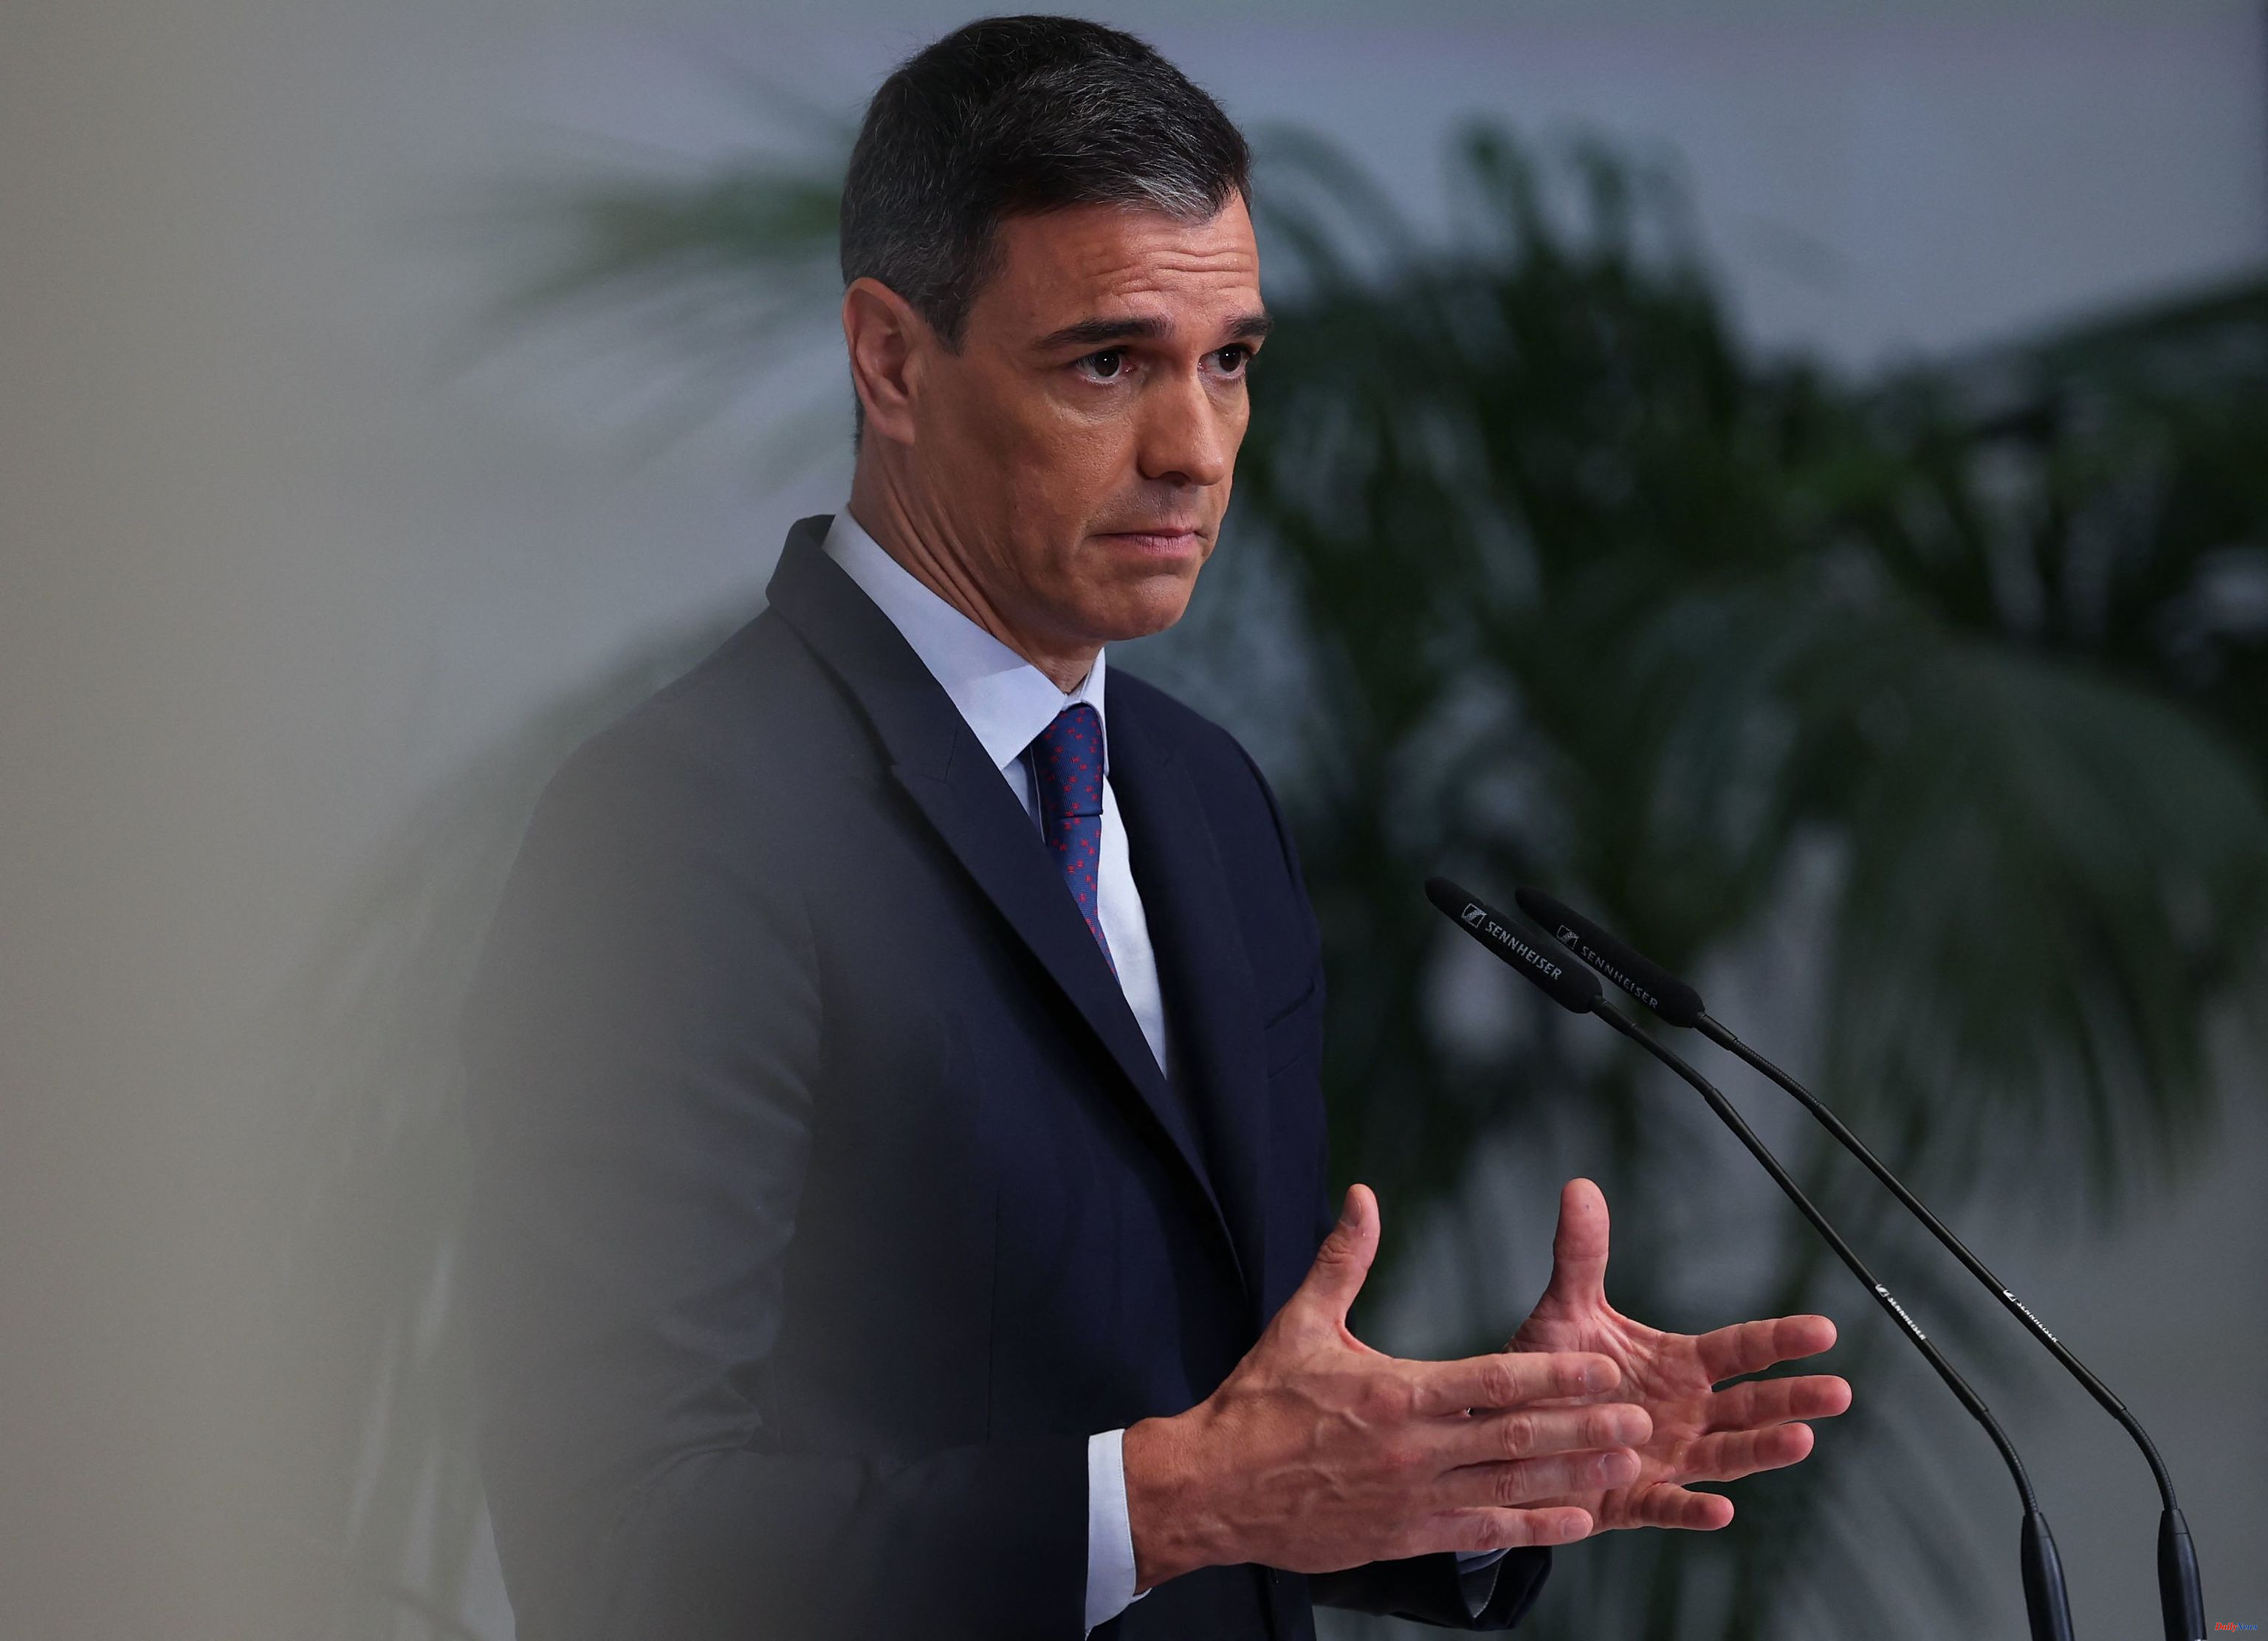 Sánchez Funds promises 18 structural reforms, with changes in employment and energy, 47 days from 23J